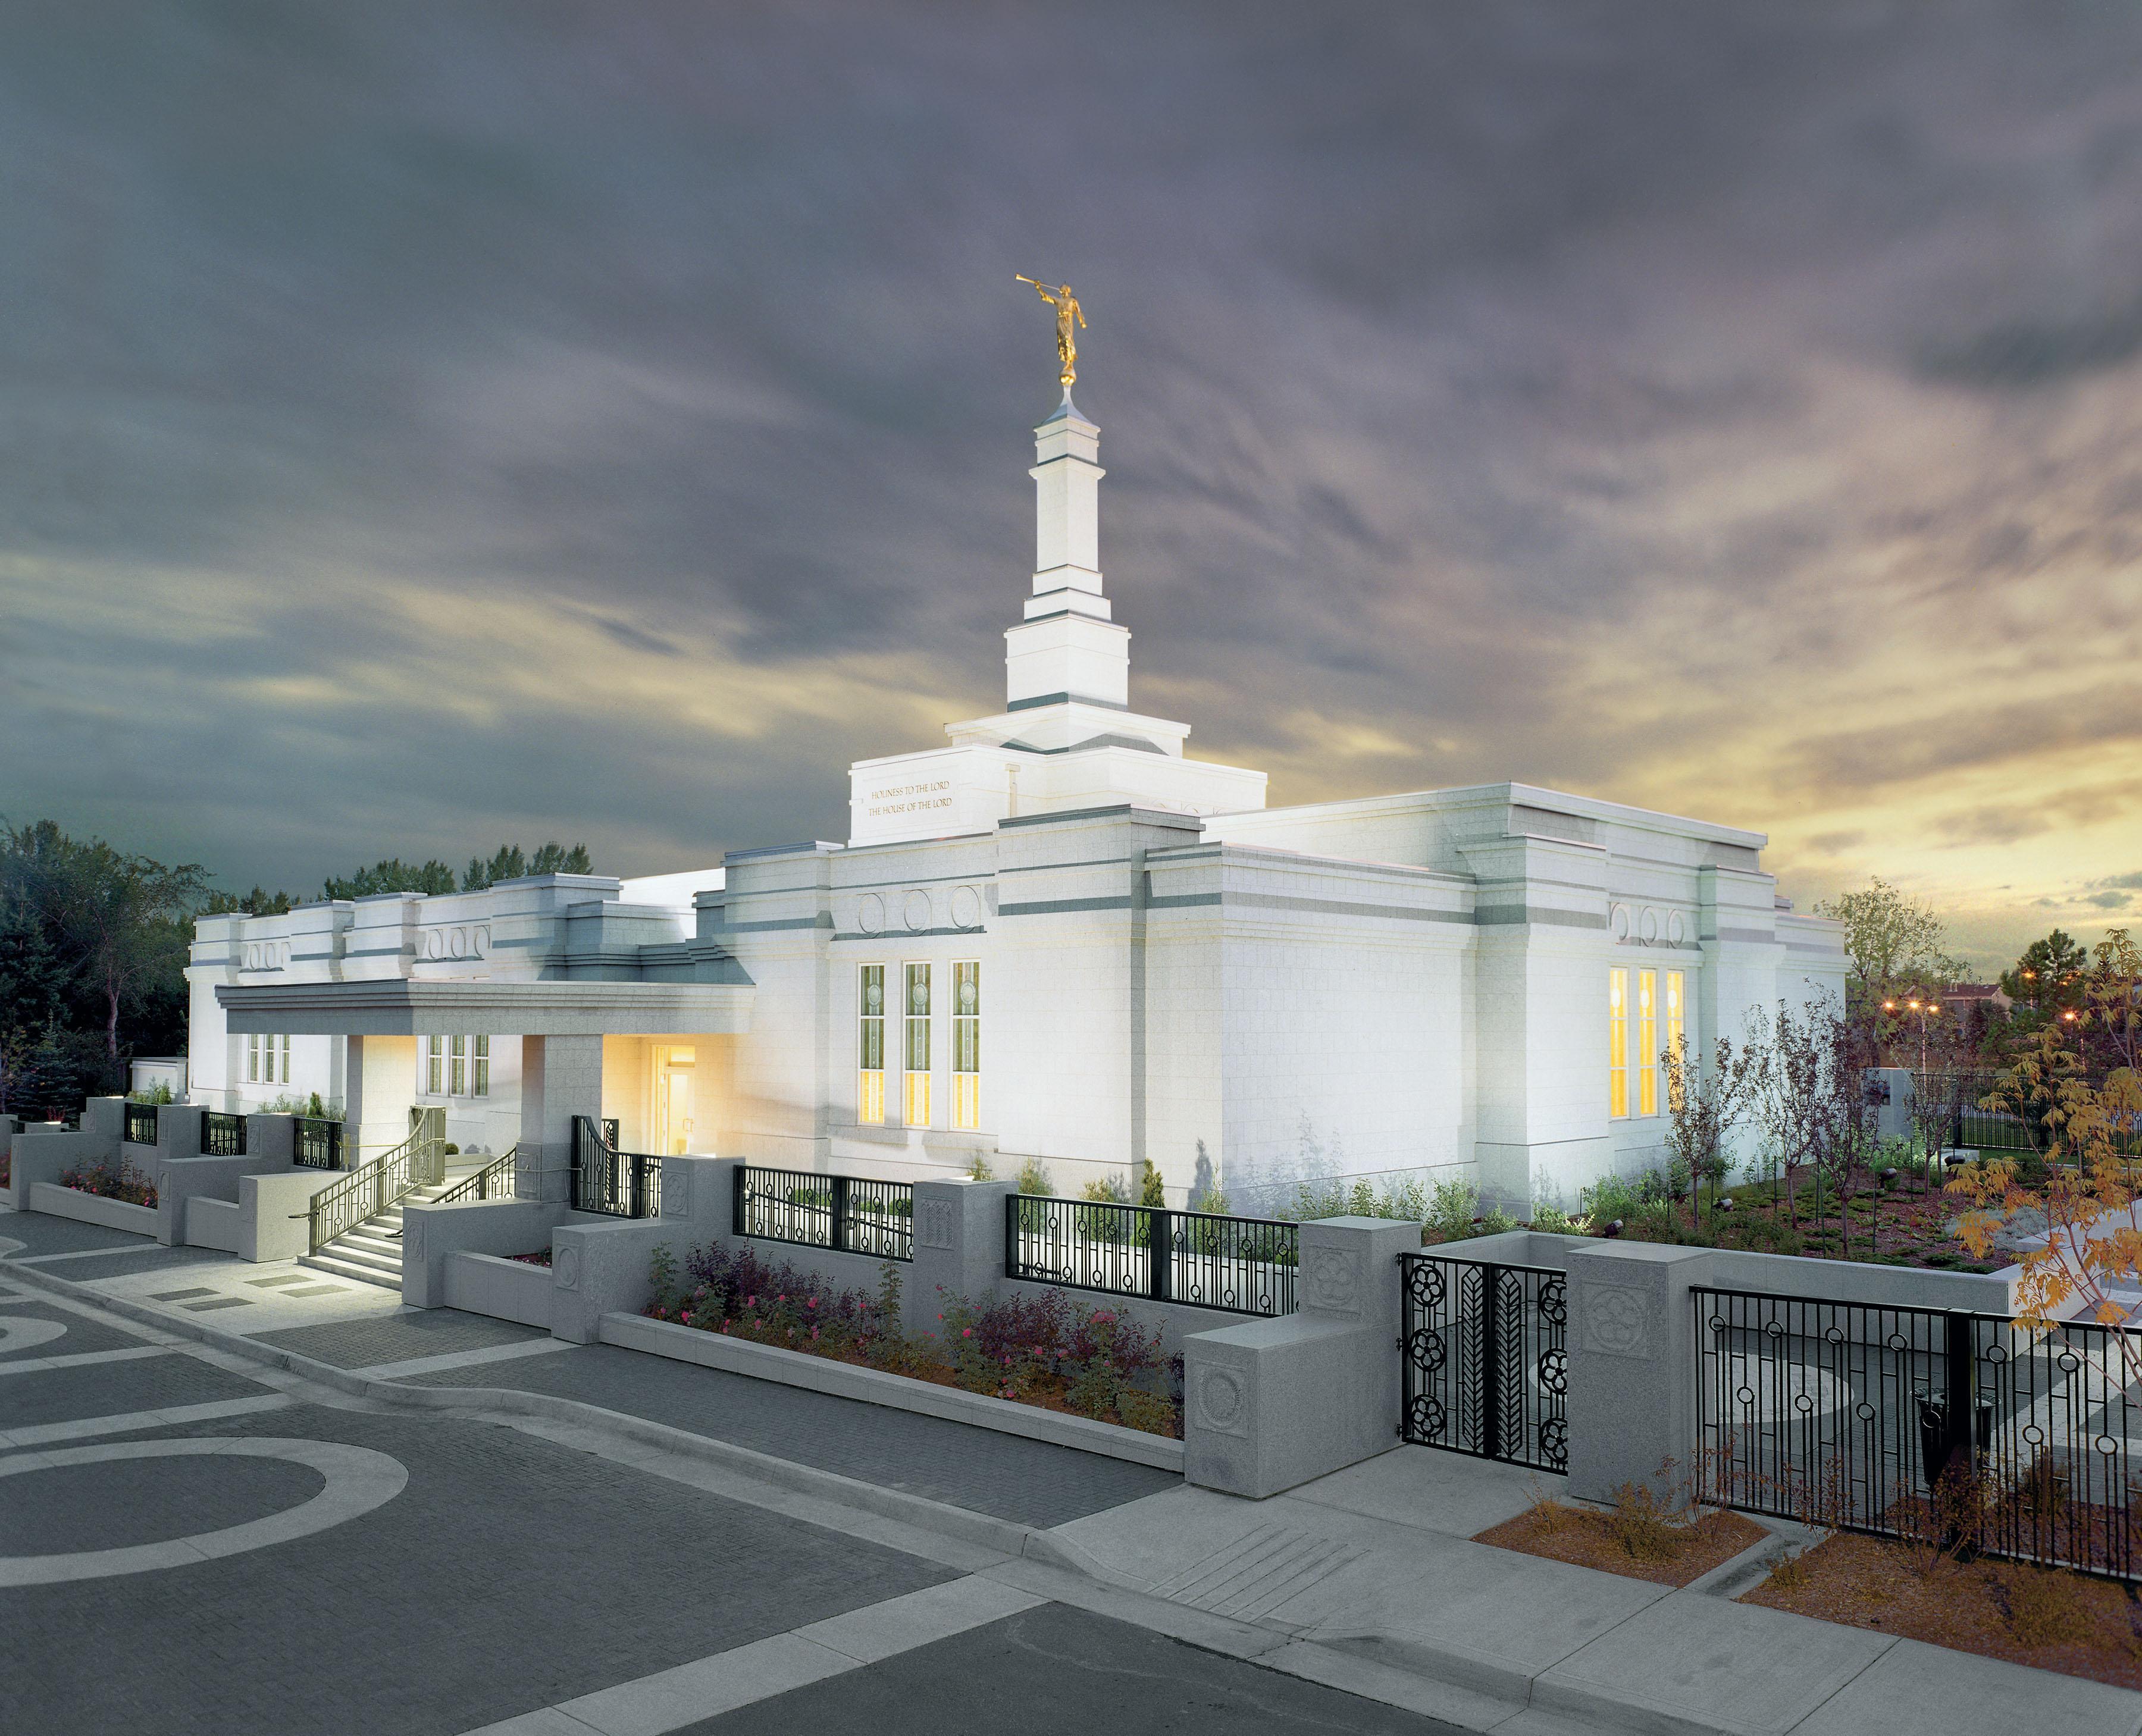 The Edmonton Alberta Temple, a white building with a steeple topped by a golden statue of an angel blowing a trumpet.